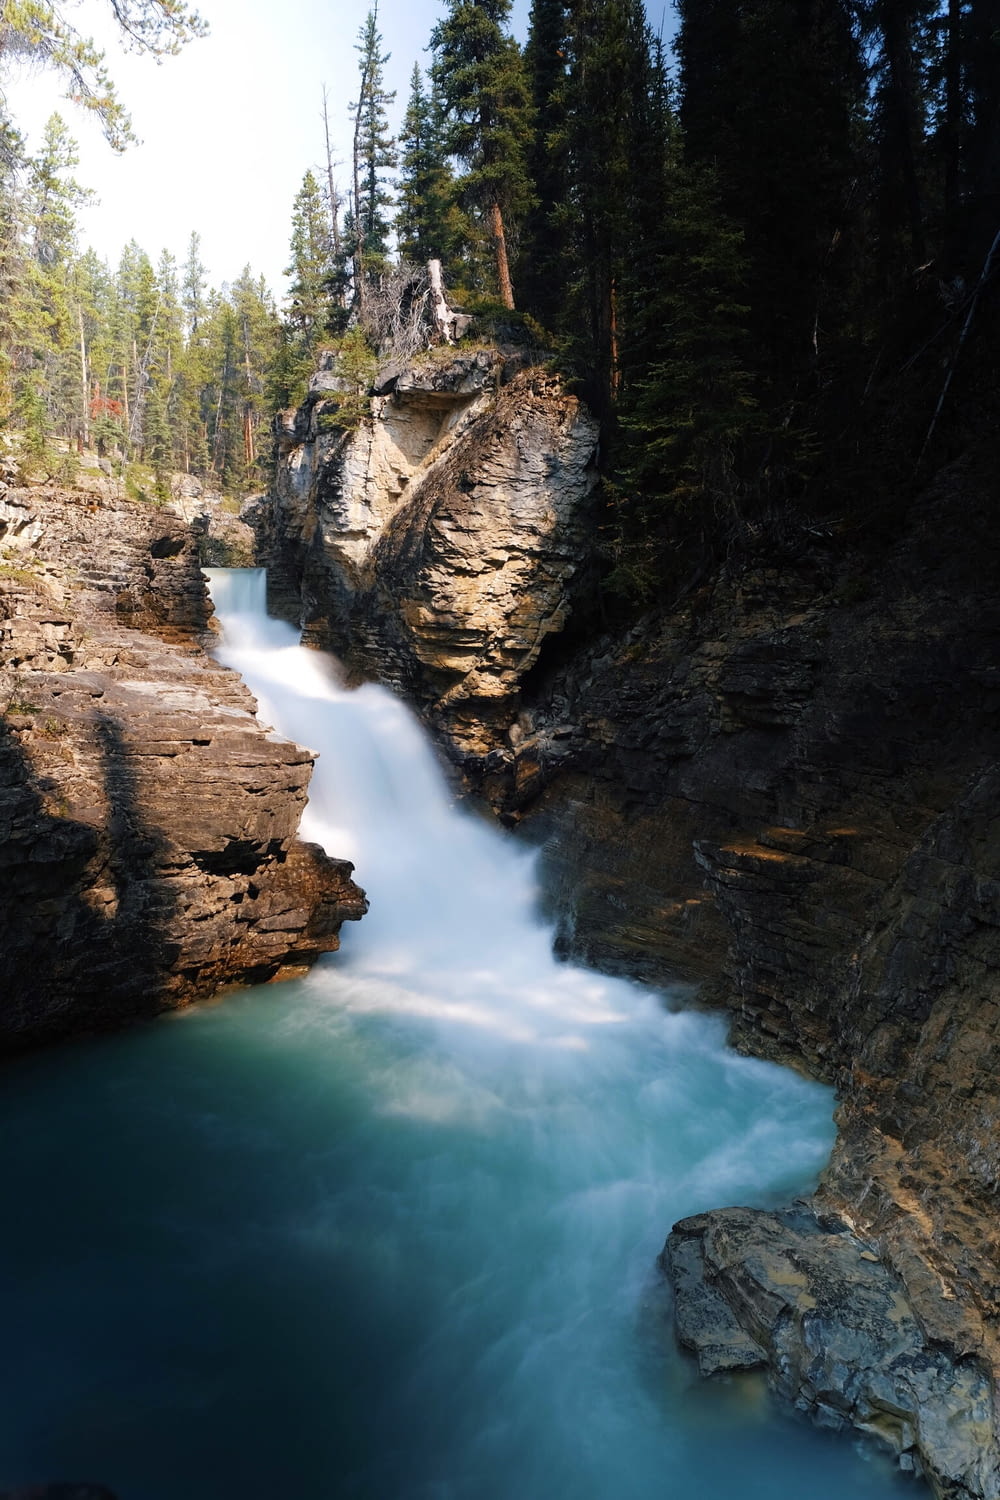 time-lapse photography of waterfalls near trees